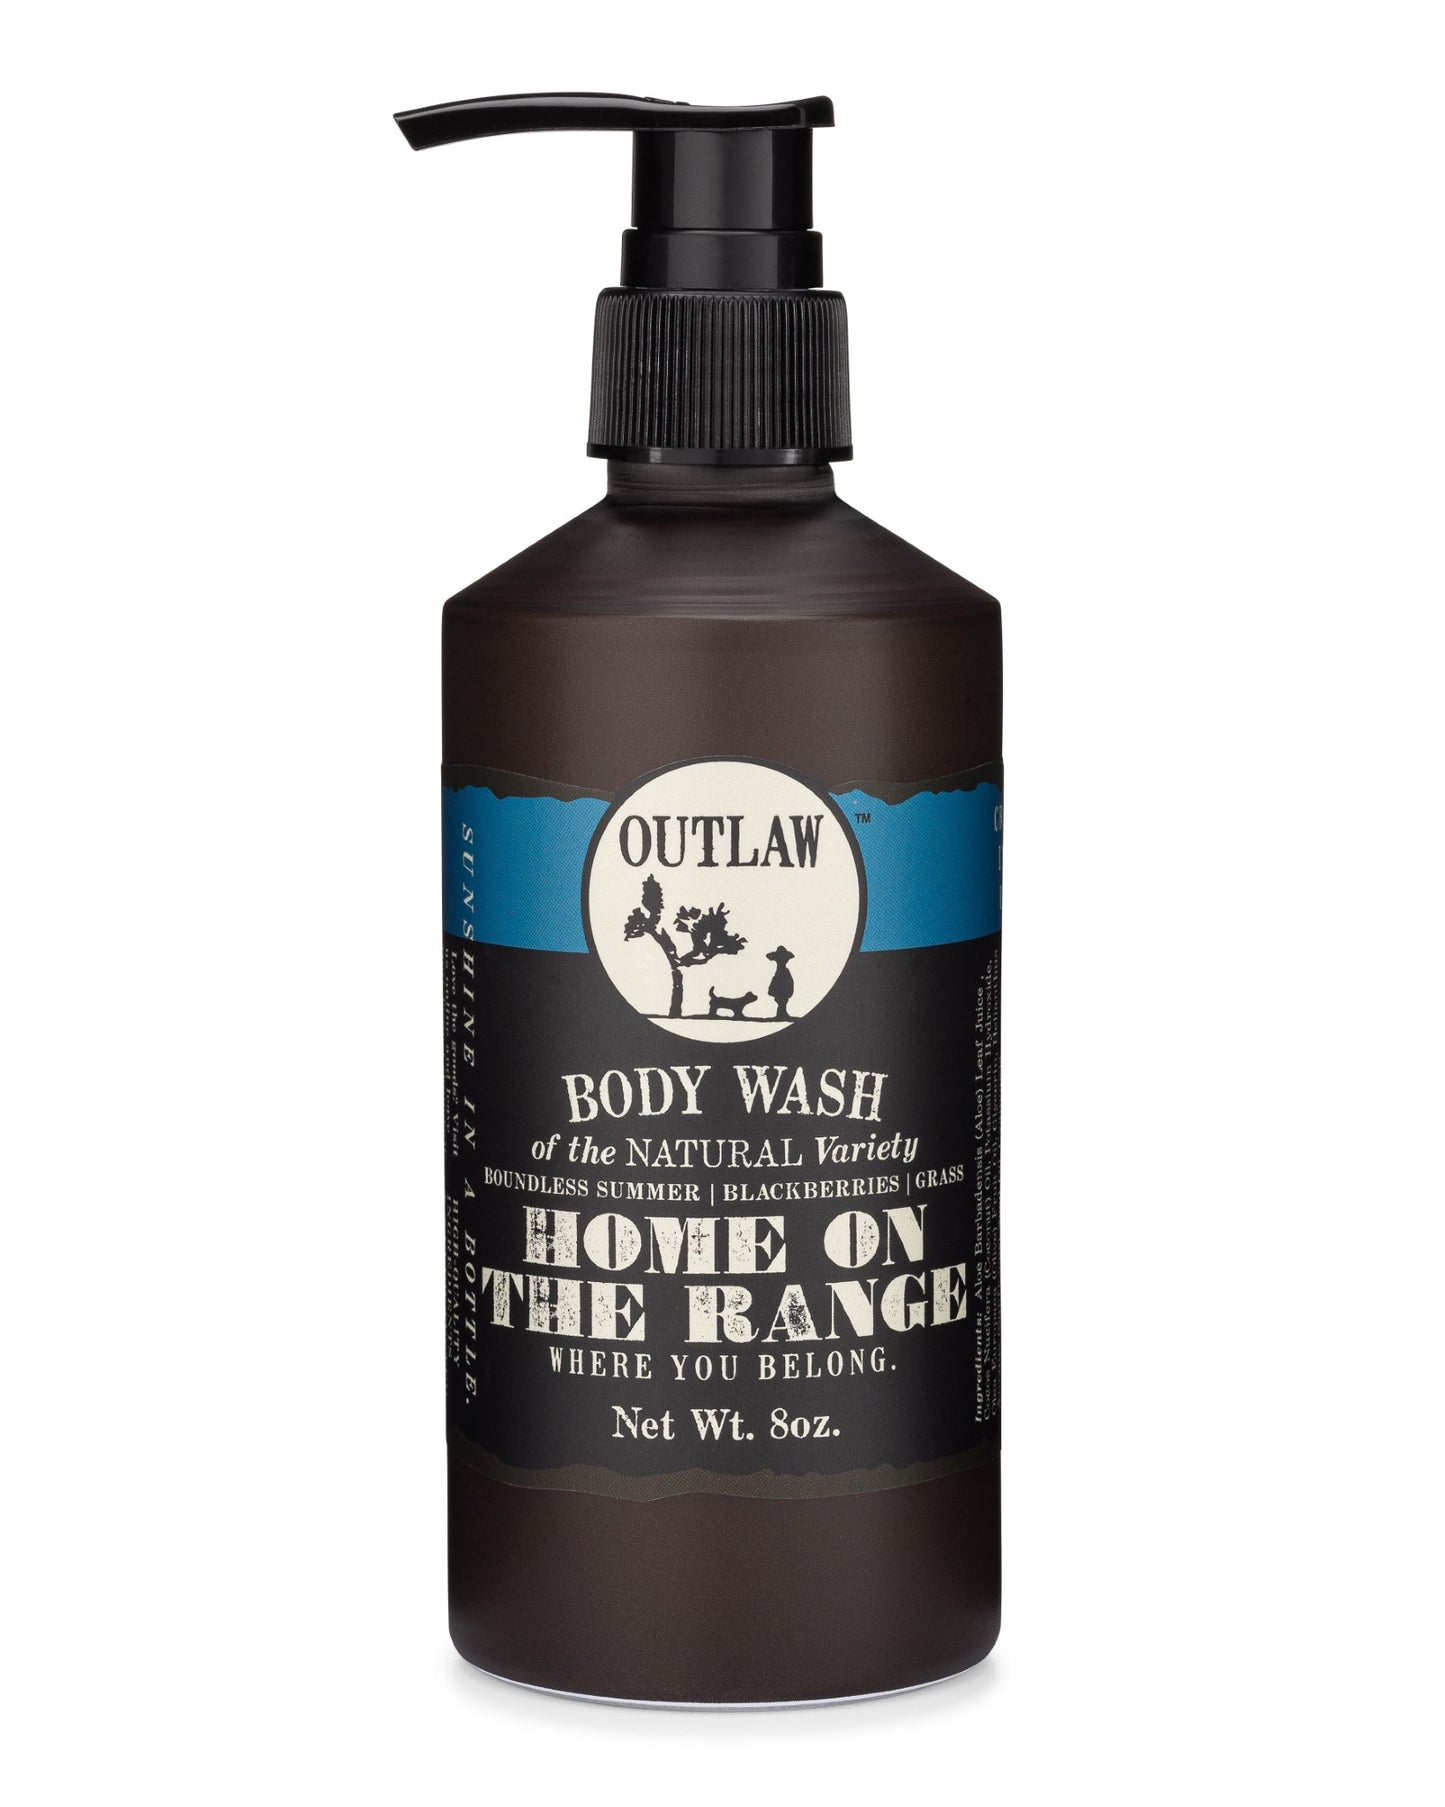 Outlaw Home on the Range Body Wash